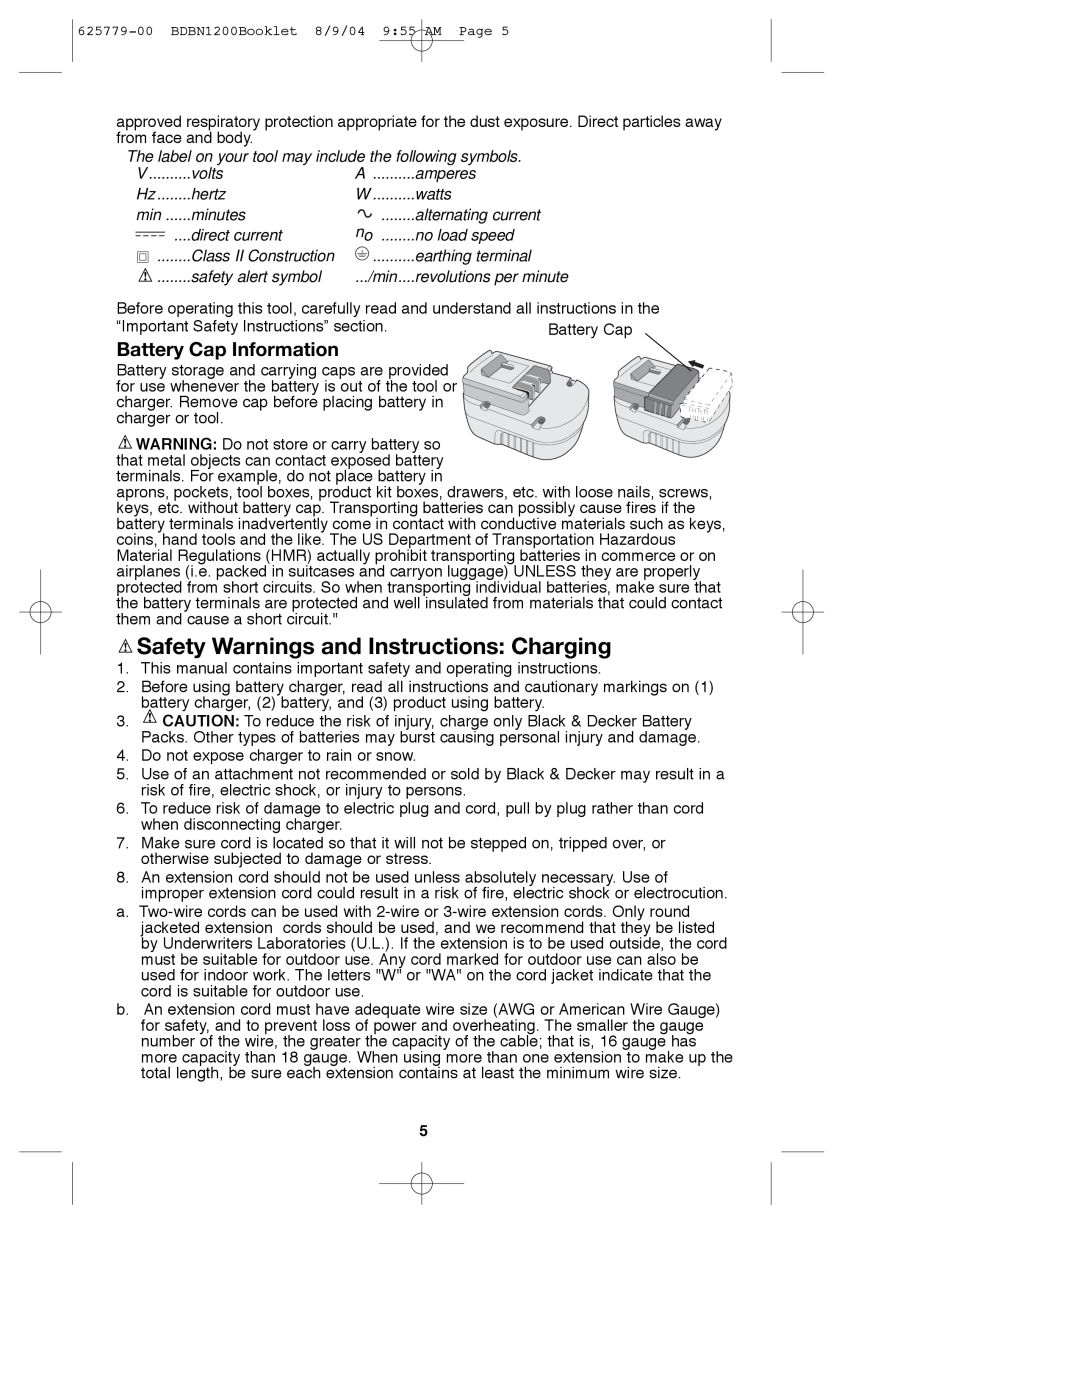 Black & Decker BDBN1200, 625779-00 instruction manual Safety Warnings and Instructions Charging, Battery Cap Information 